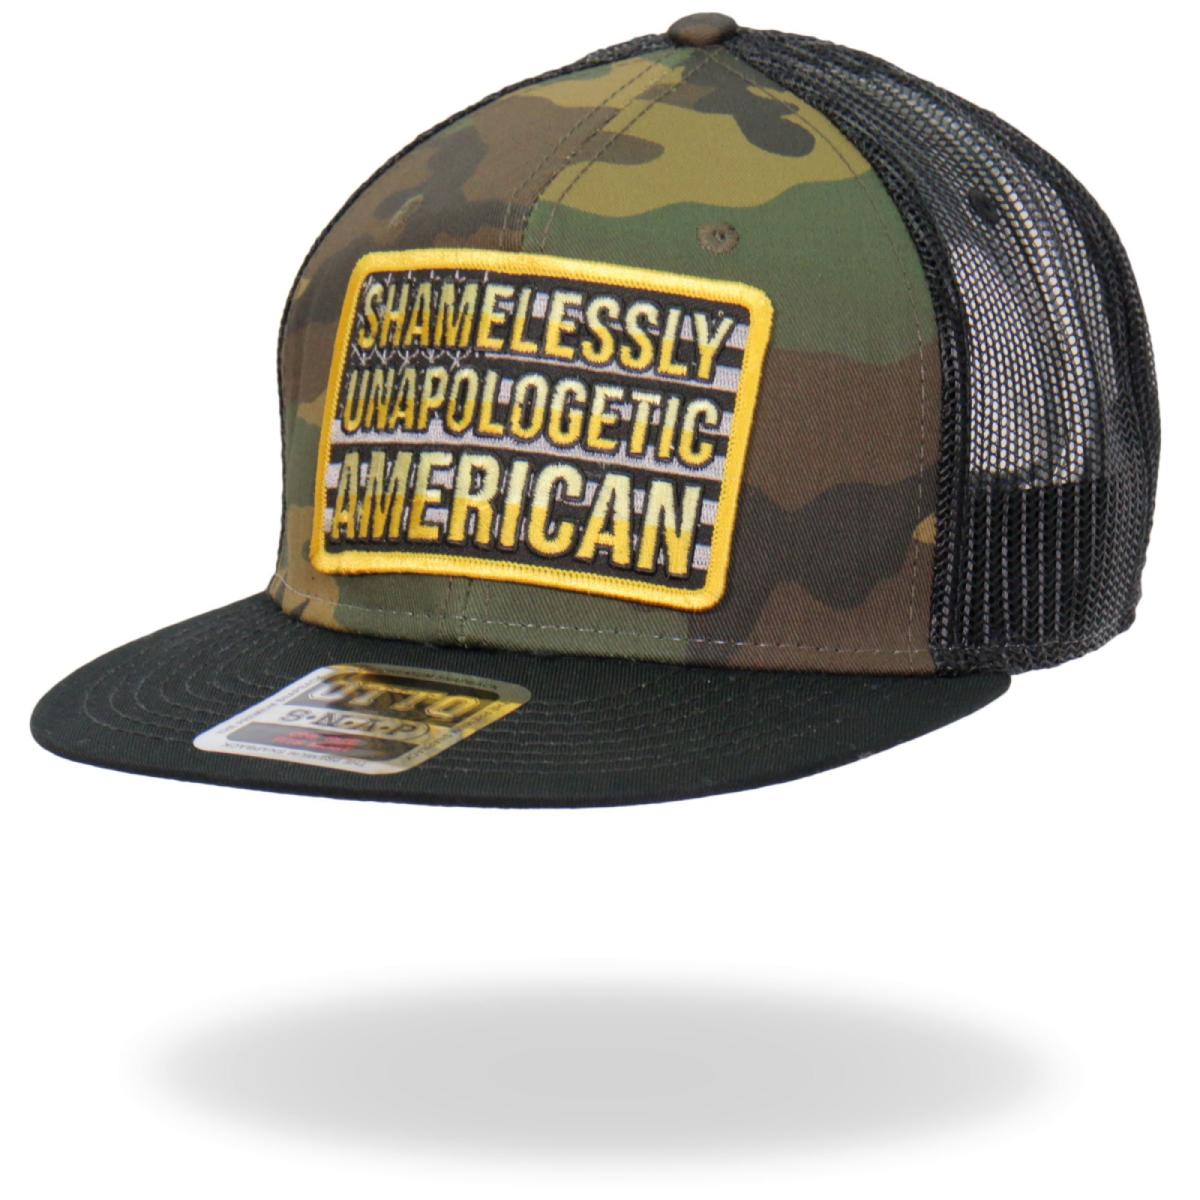 Hot Leathers GSH2013 Unapologetic Snapback Hat